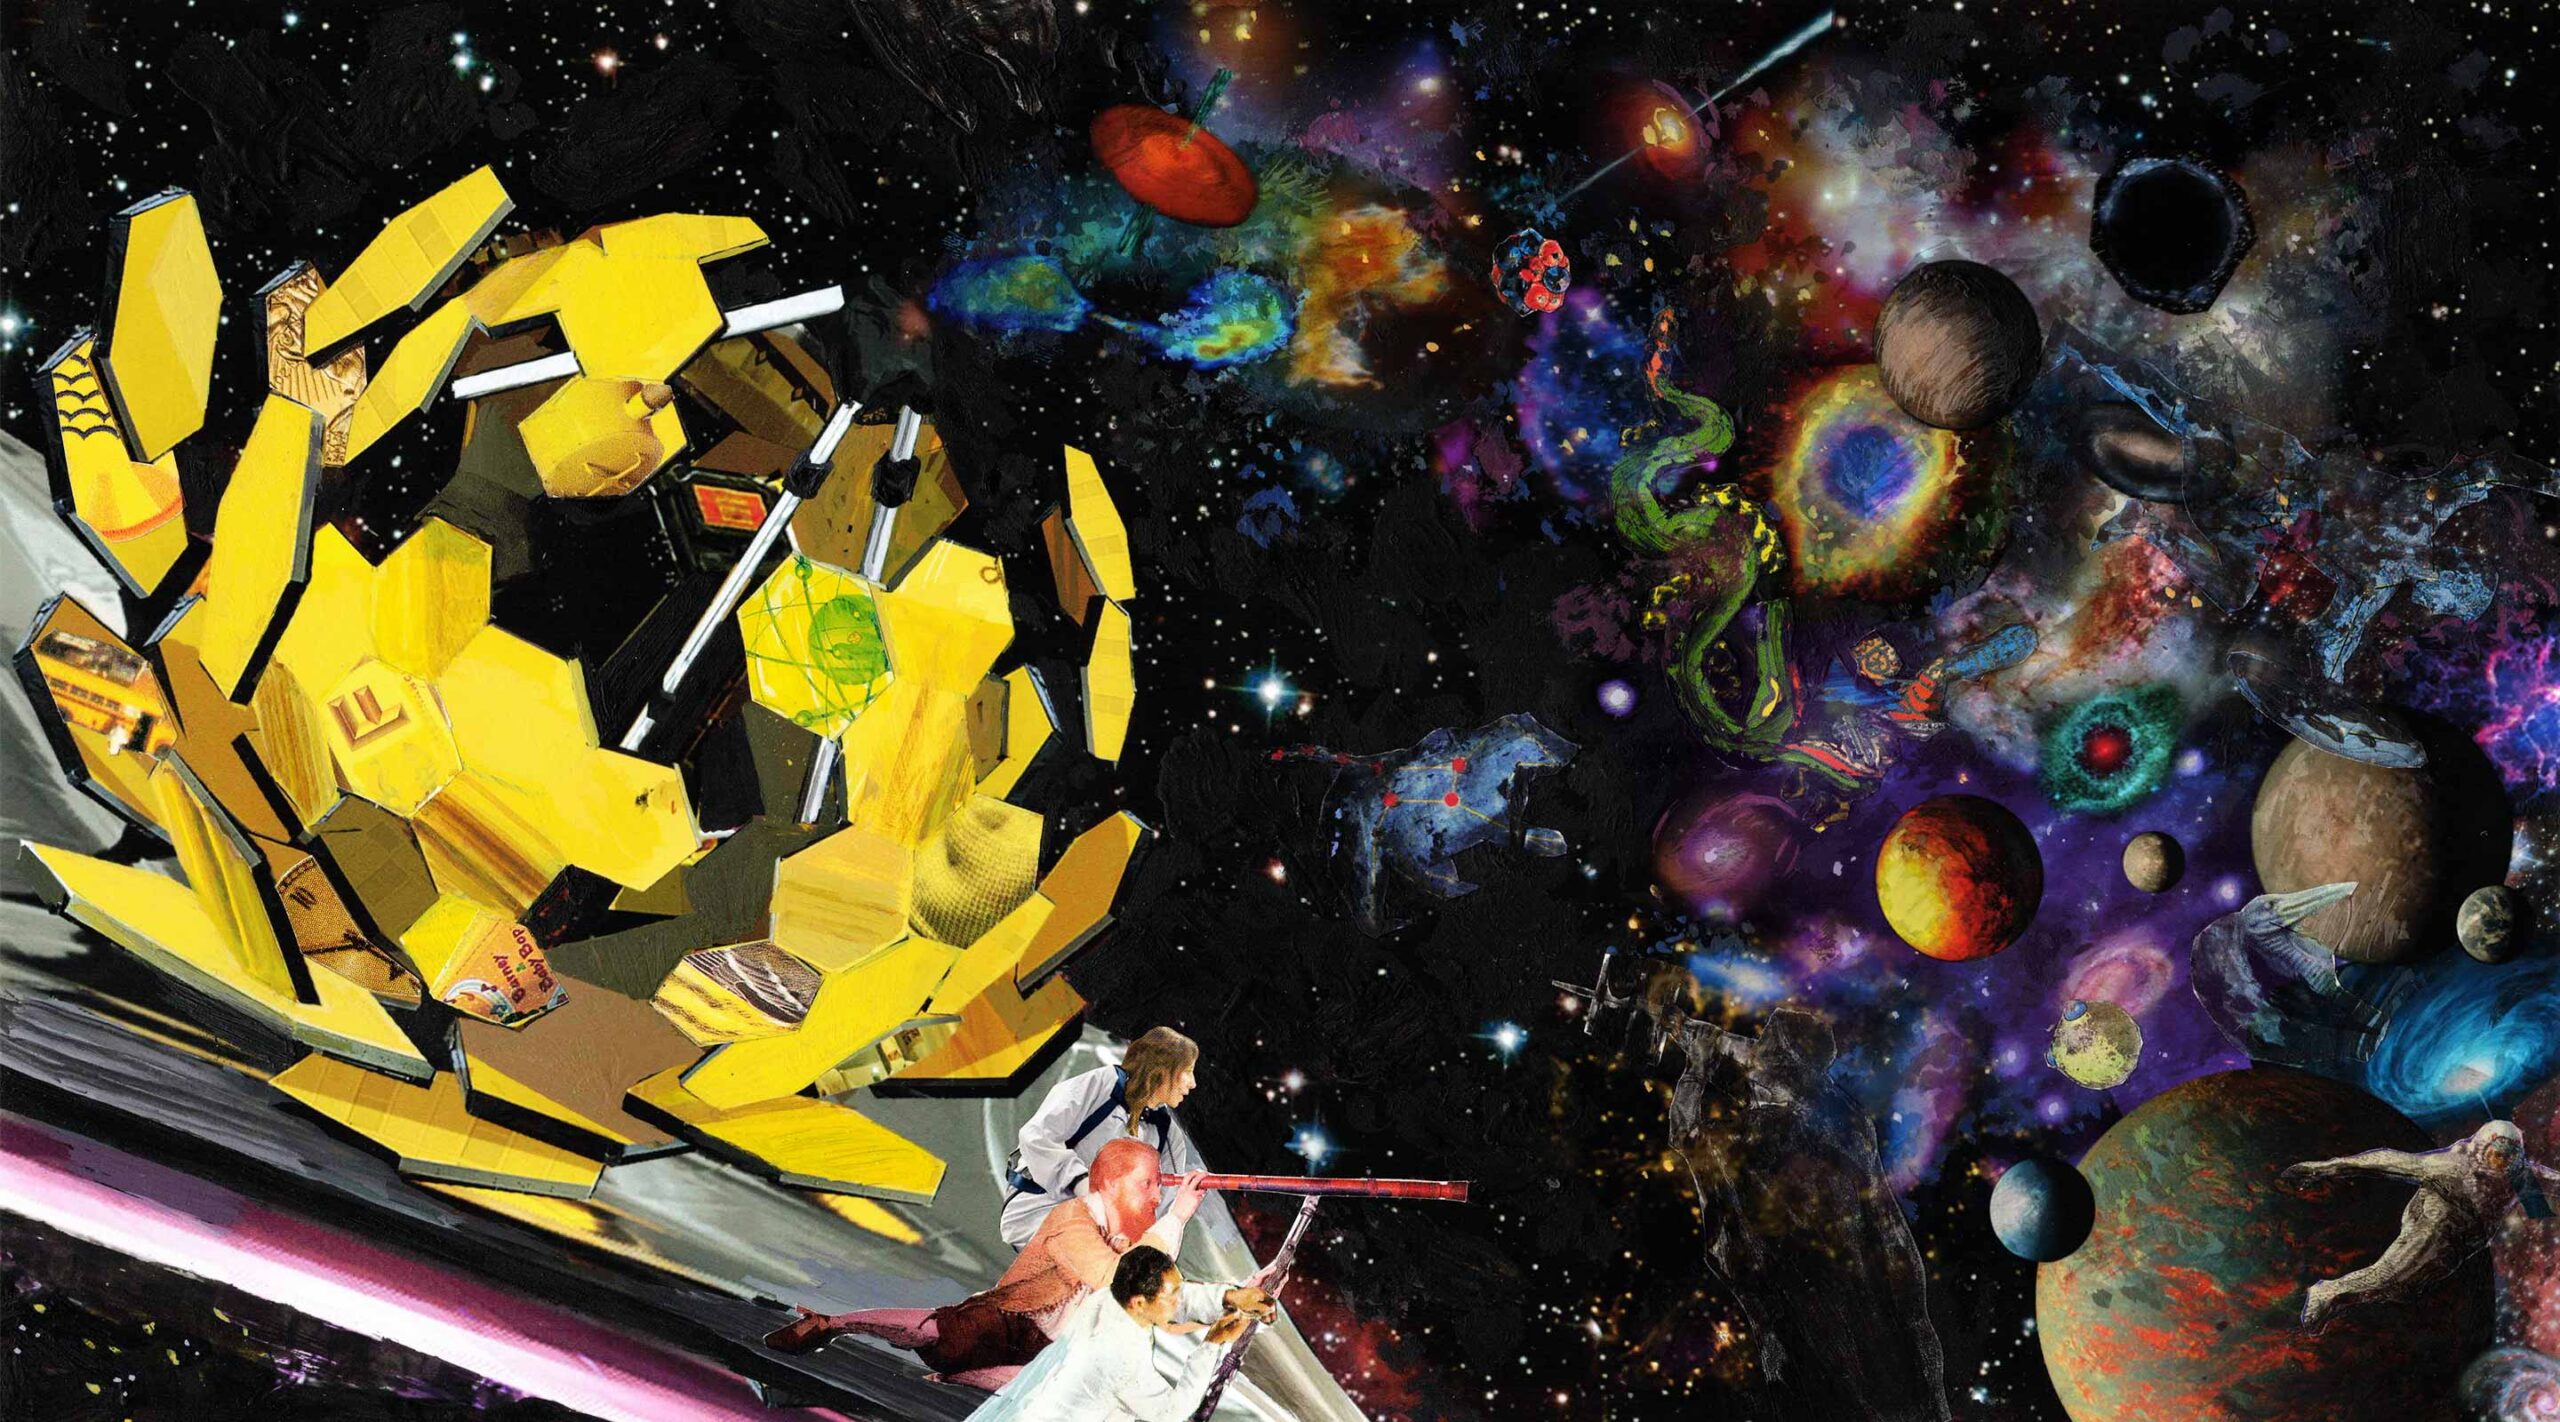 Did NASA’s James Webb Space Telescope Break Another Record? New Findings Suggest So